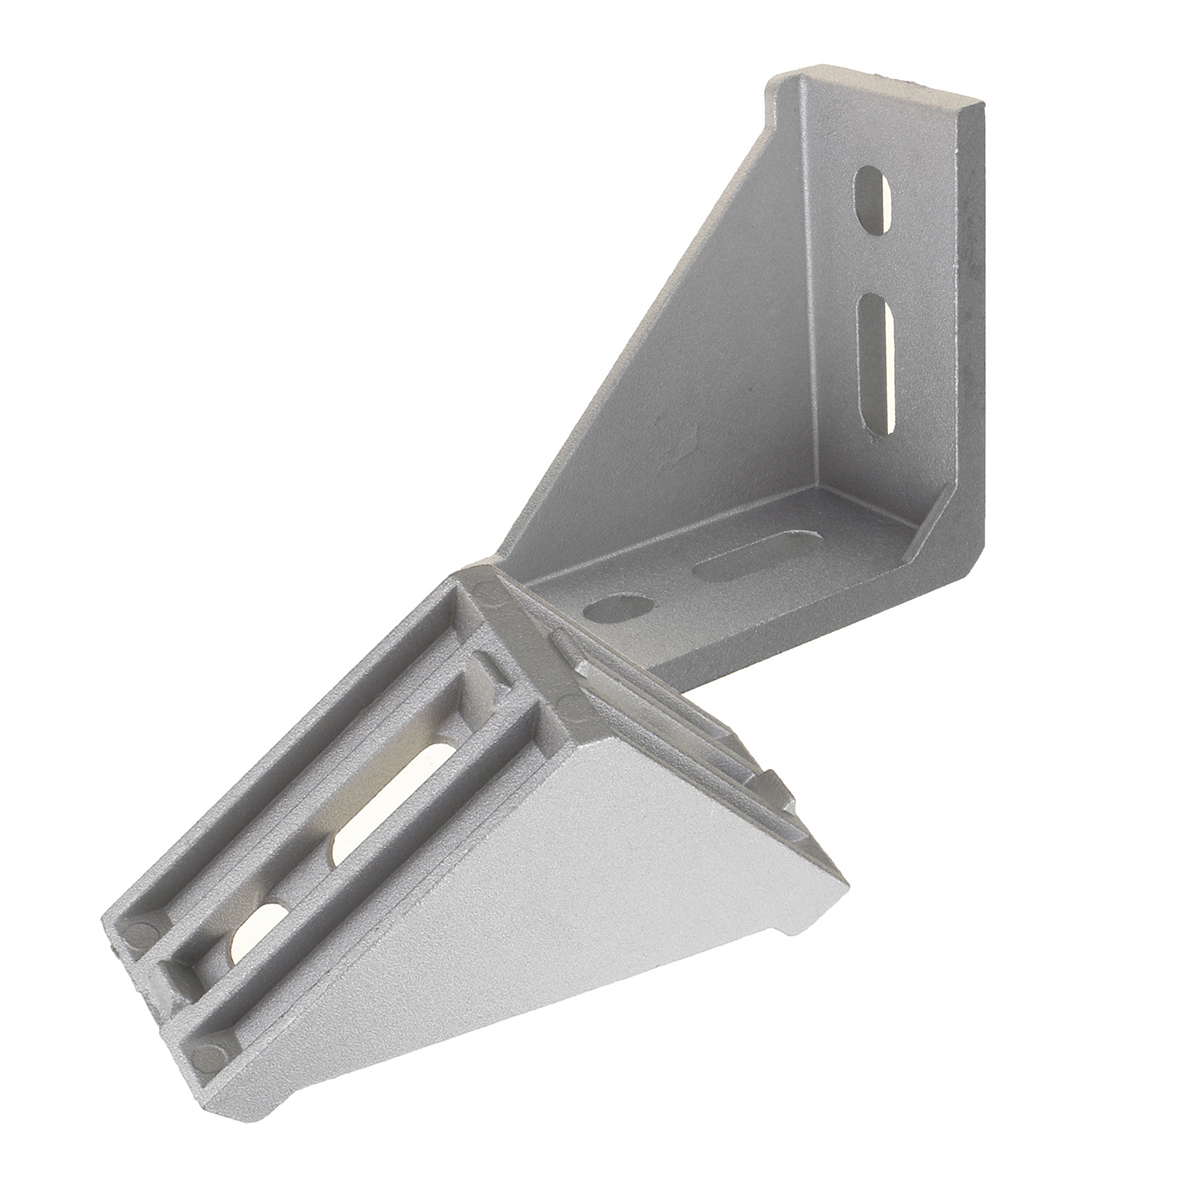 Sulevetrade-AJ40-40times80mm-Aluminum-Angle-Corner-Joint-Connector-90-degrees-4080-Series-Aluminum-P-1293672-3